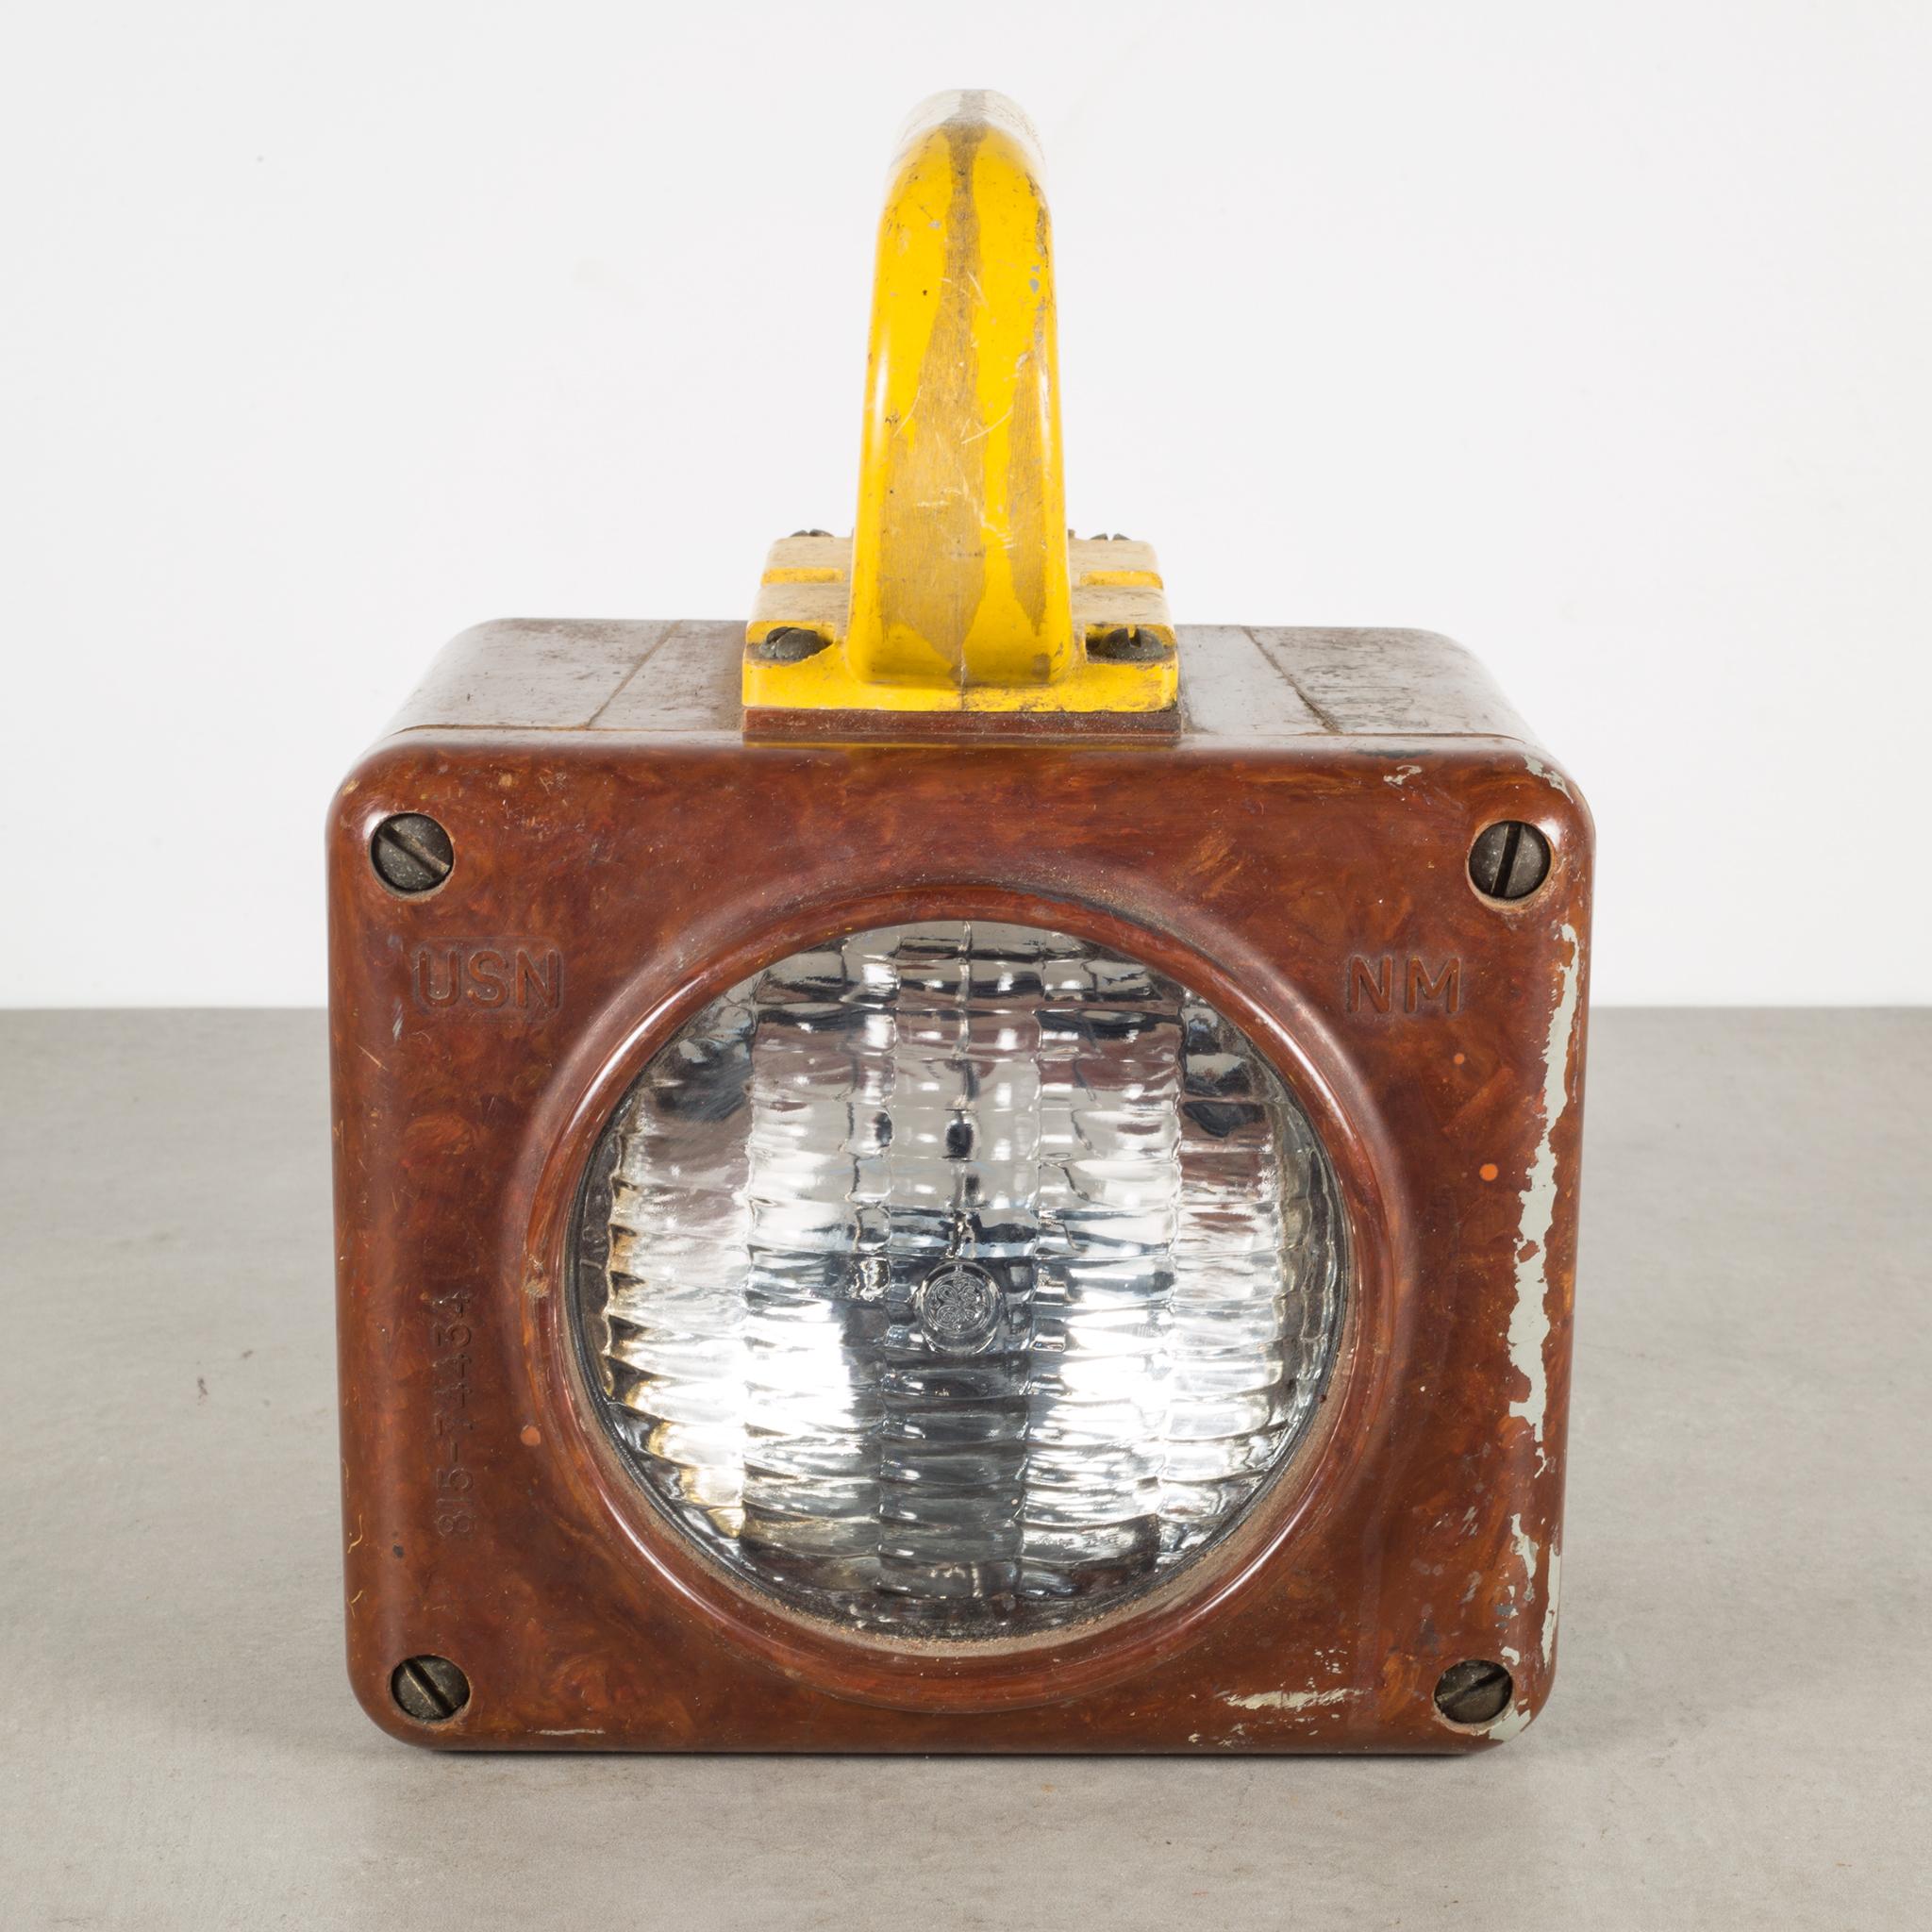 About

An original U.S. Navy all Bakelite ship lantern light. The light has a switch on the top. The light may or may not work. The 6 volt batteries are easily removable from the front plate and can be replaced. This piece has retained its